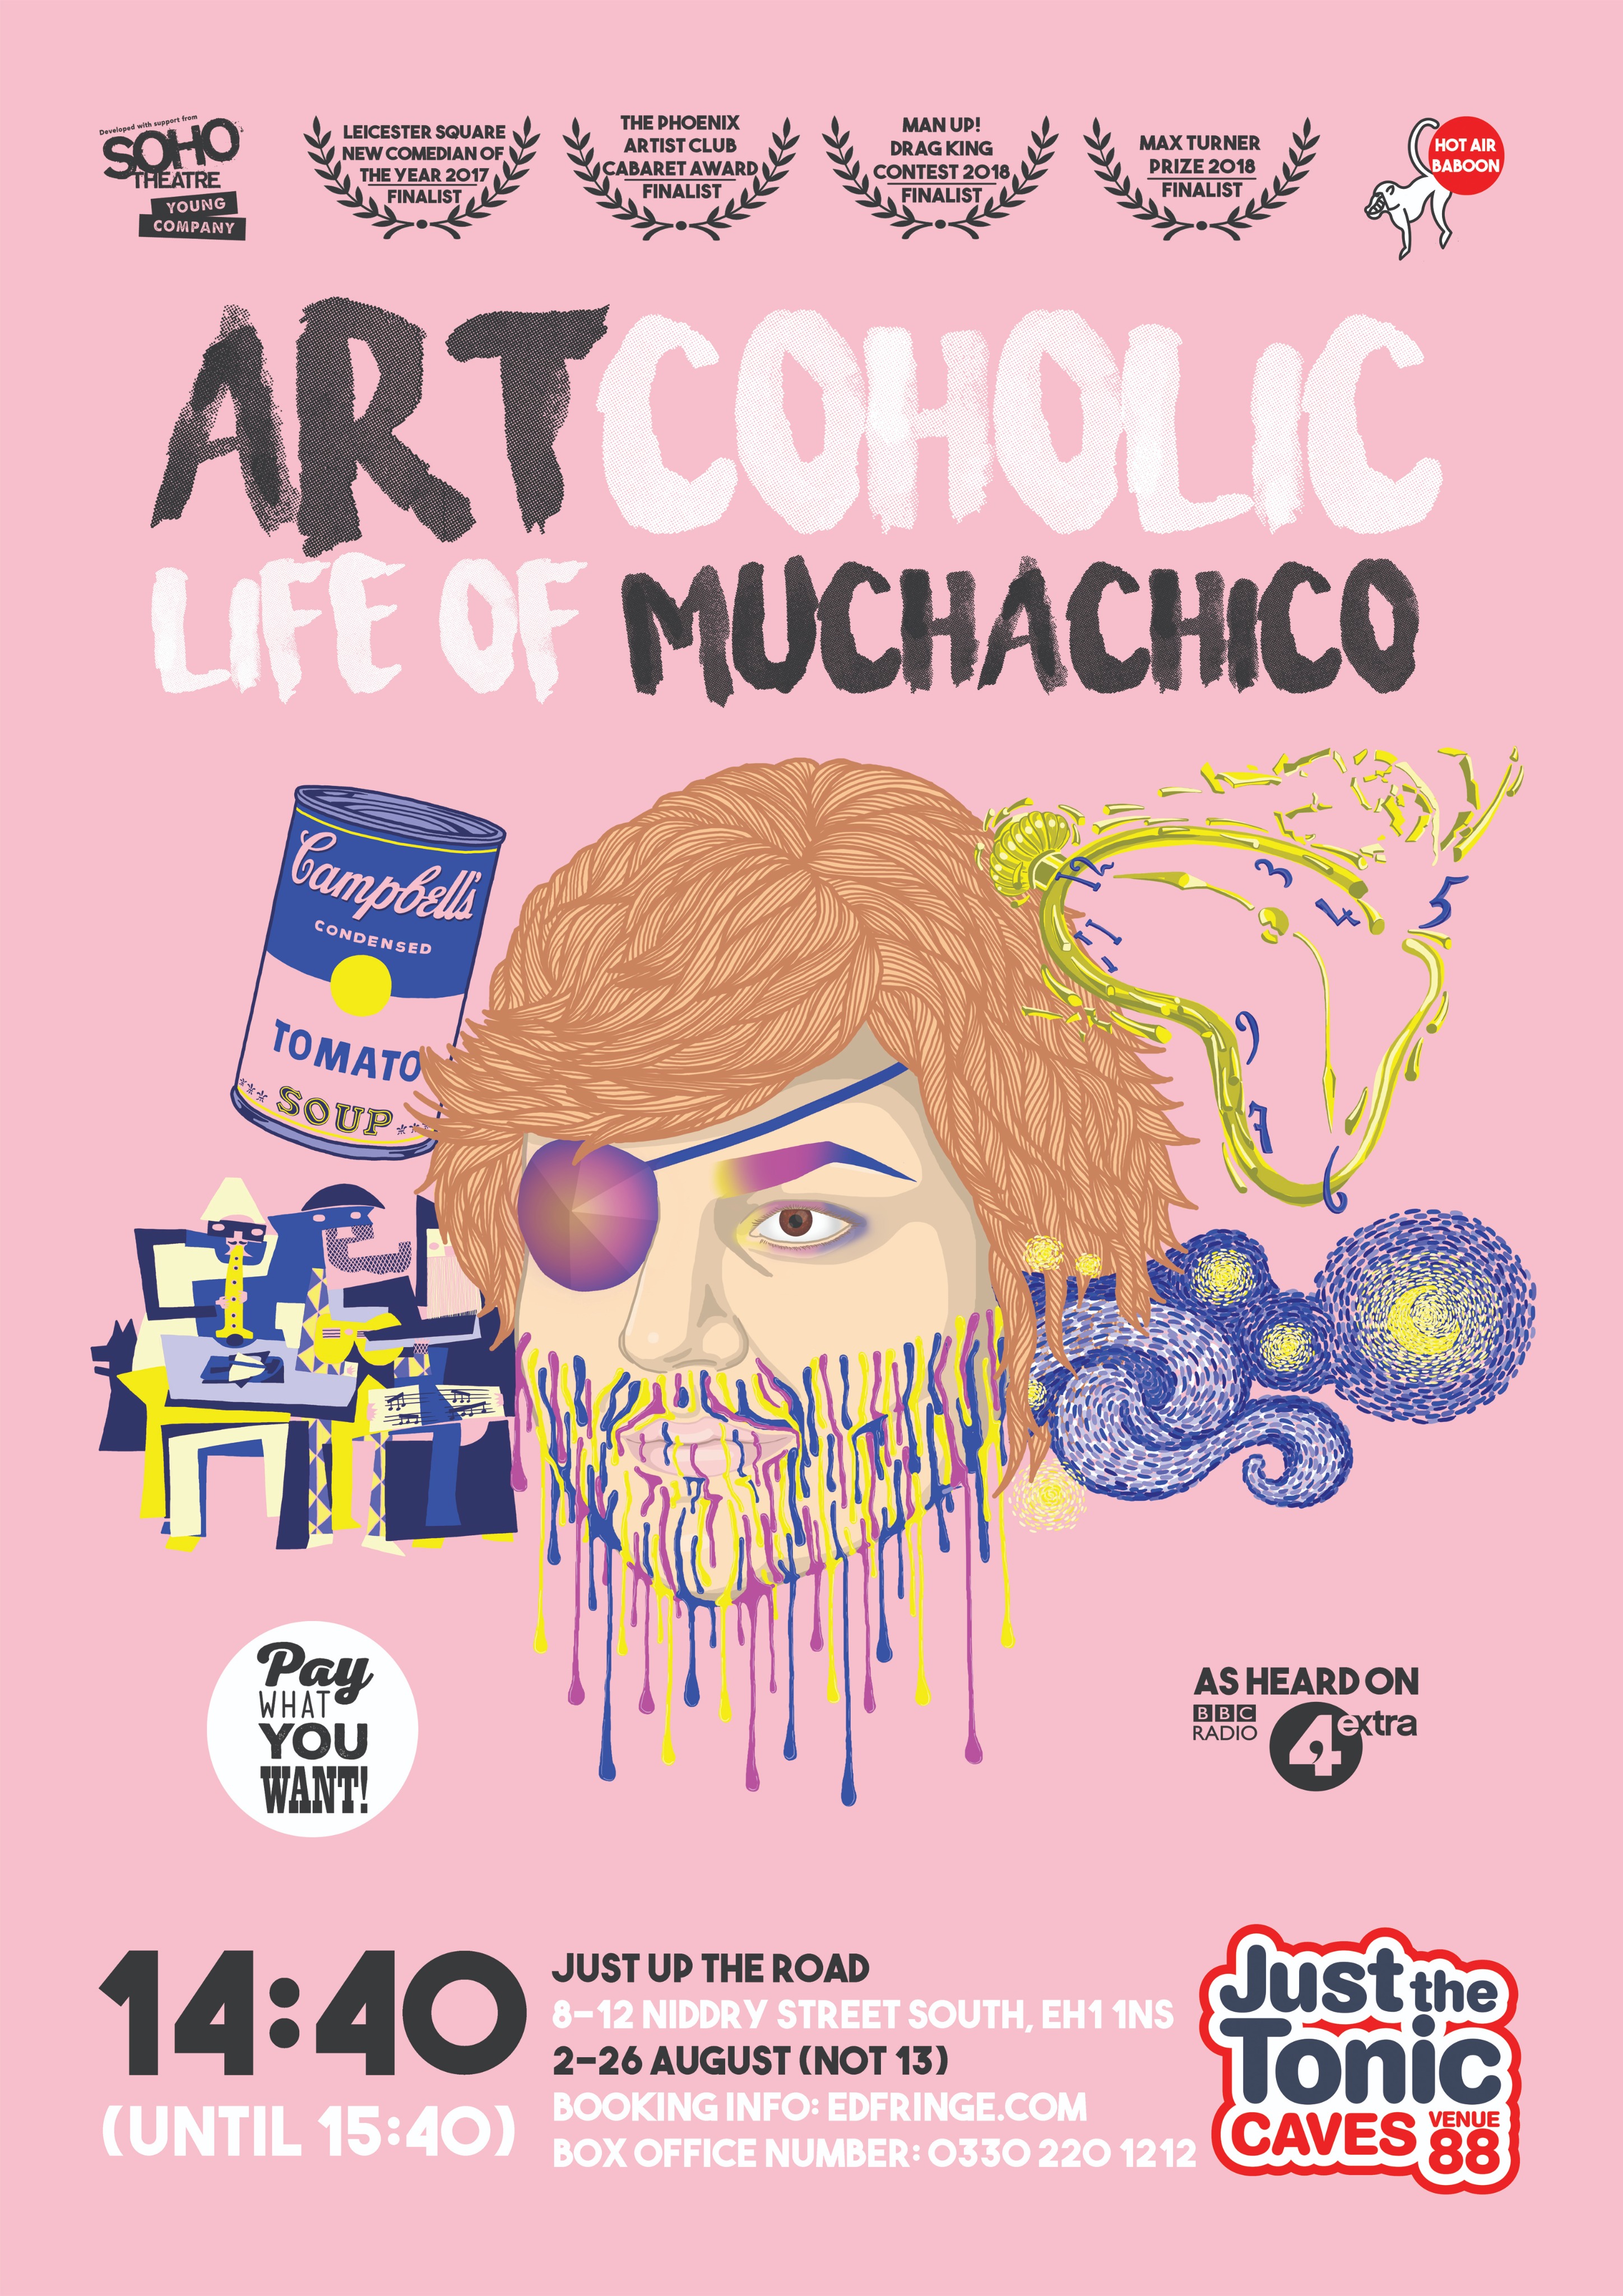 The poster for Artcoholic